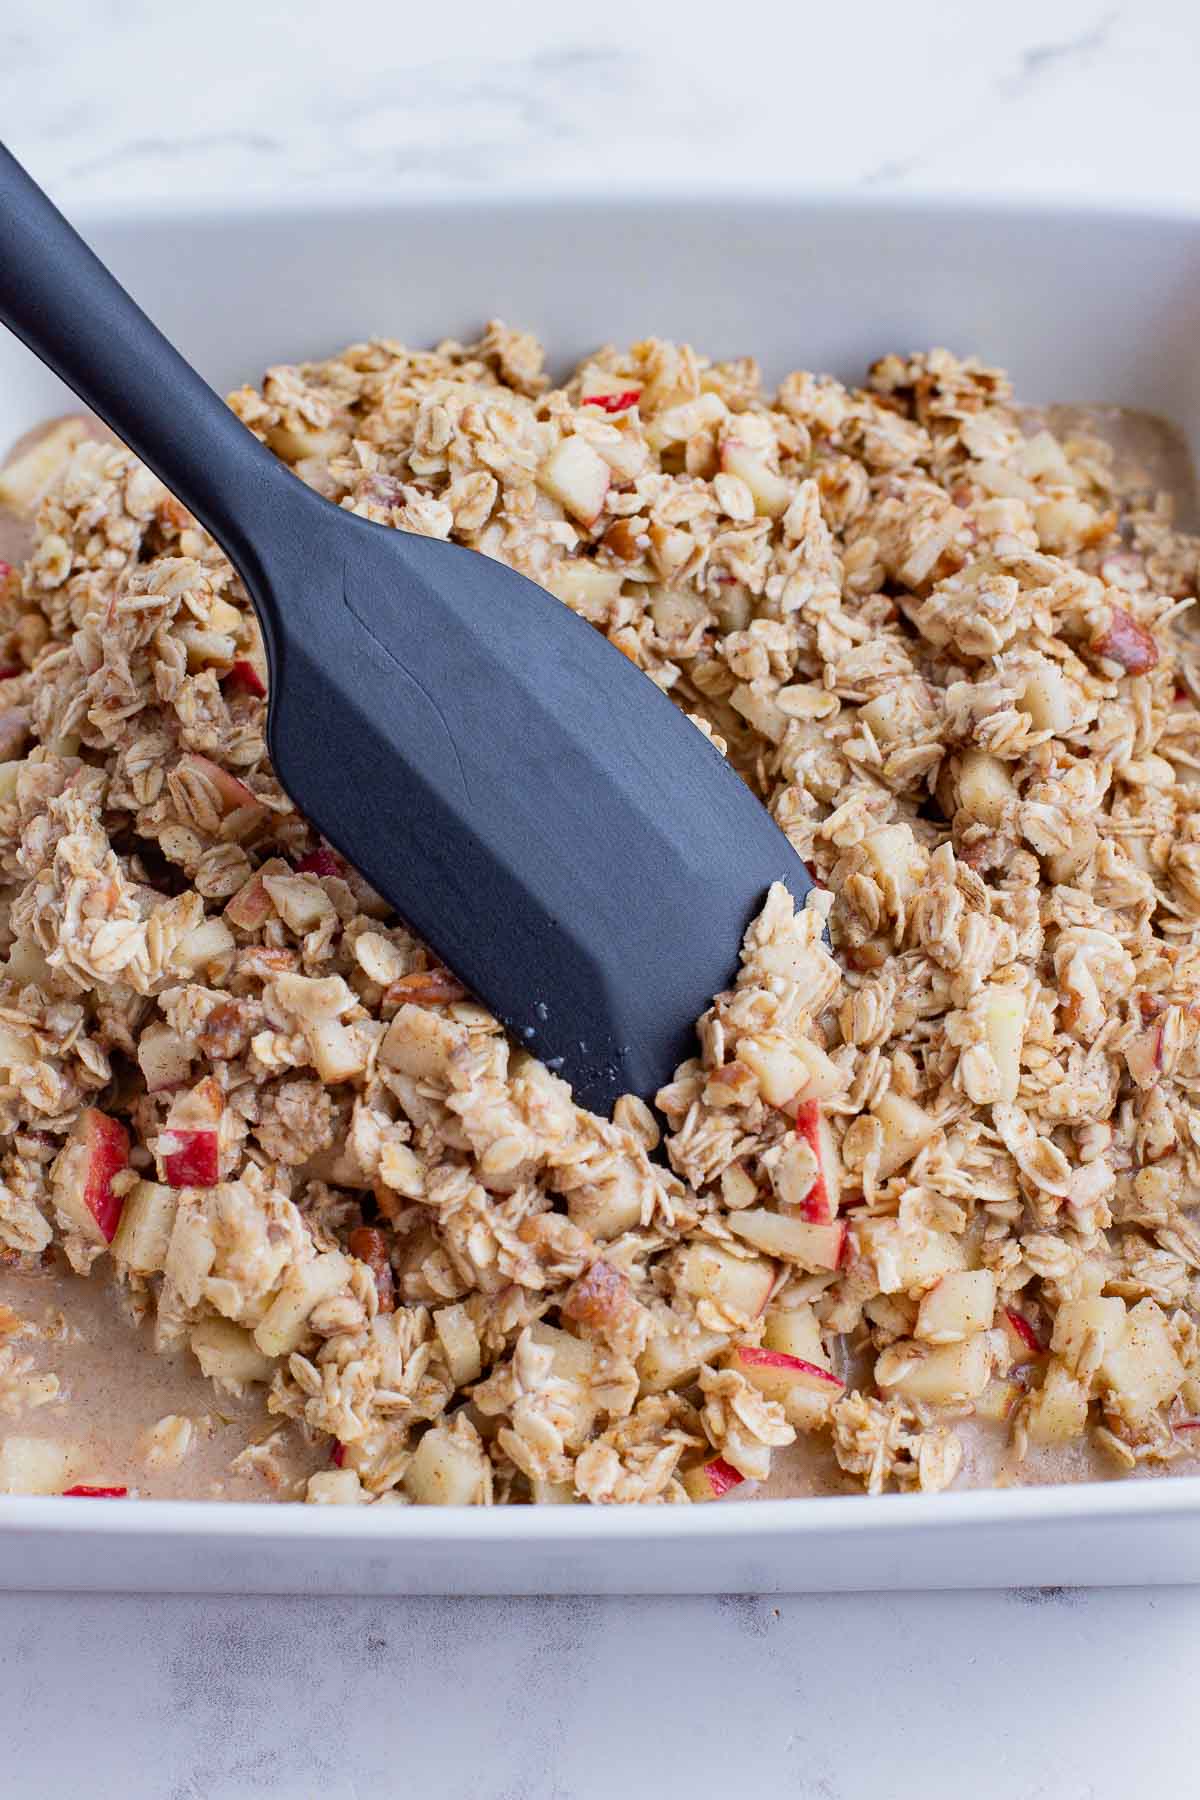 Apples are stirred into the oatmeal mixture.